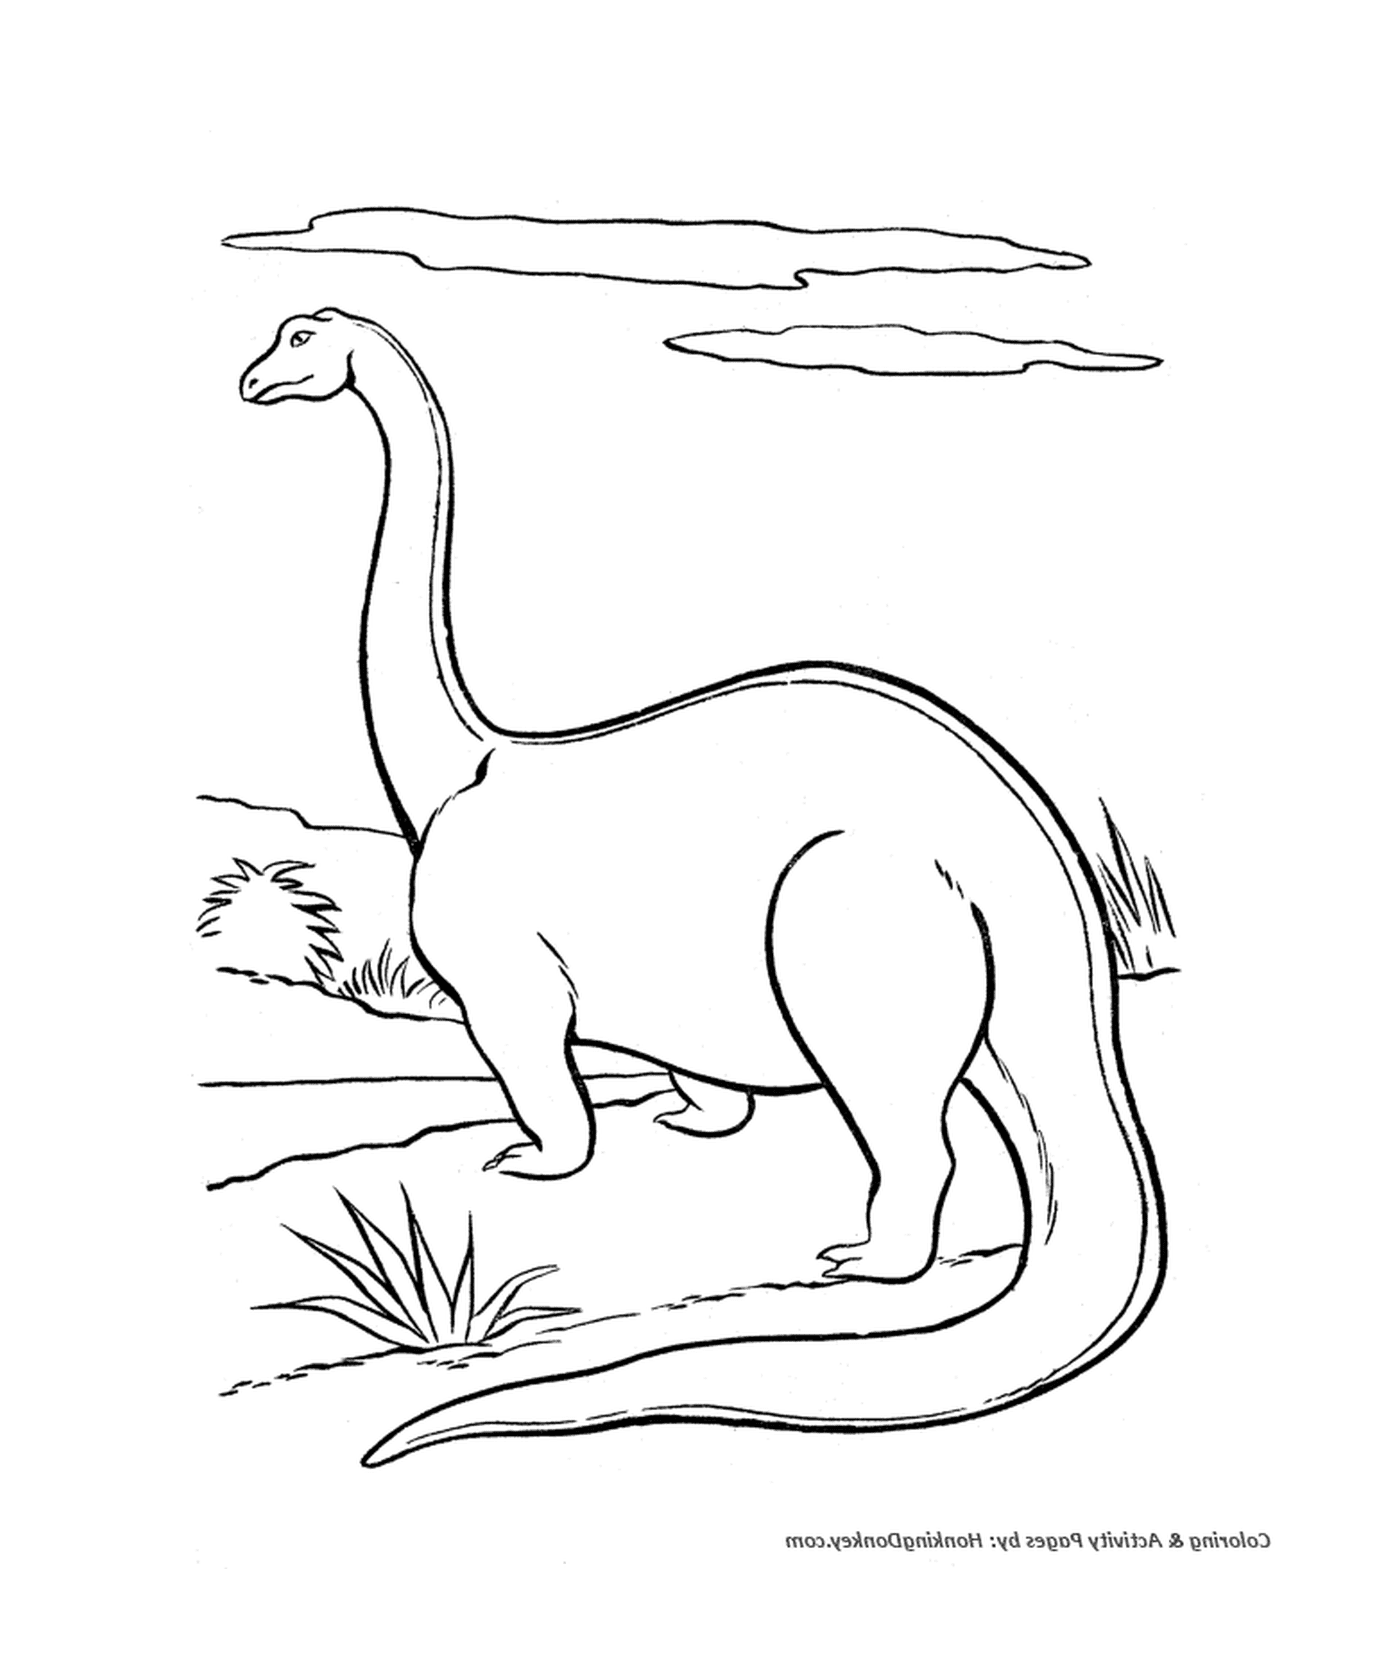  Dinosaur with long neck and long legs 